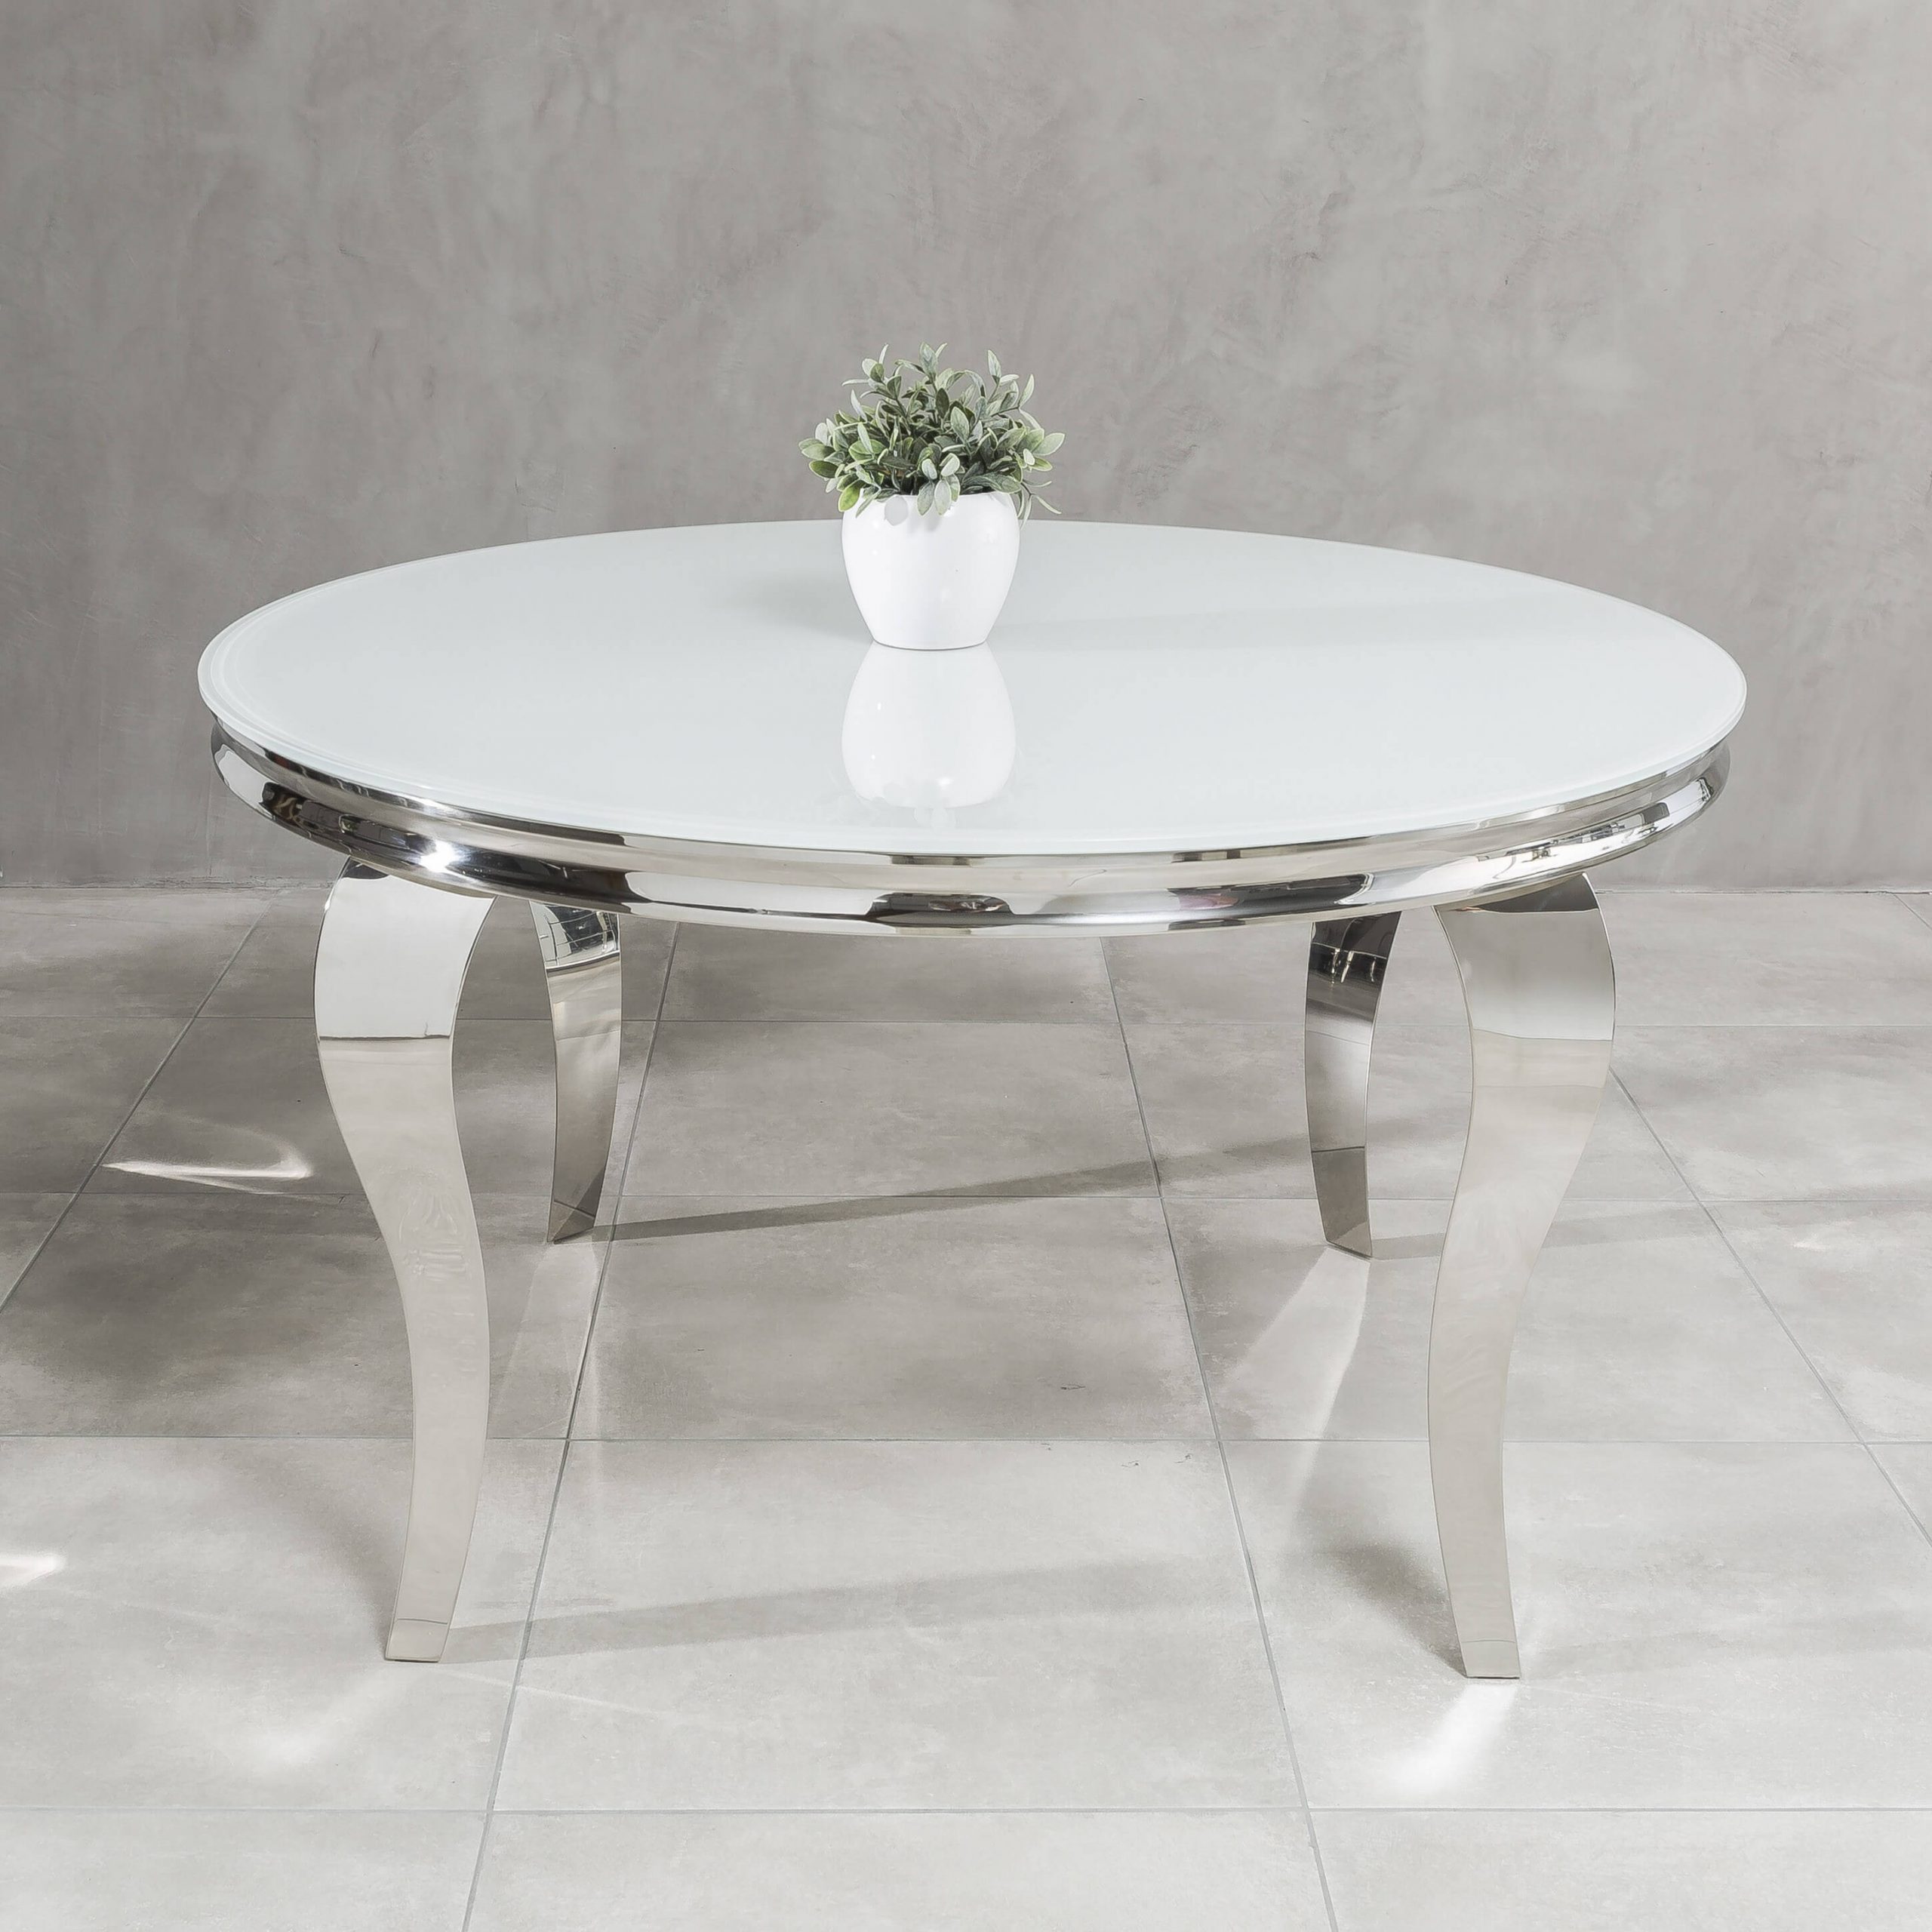 1.3m Louis Circular White Glass Dining Table x 4 Stainless Steel Legs